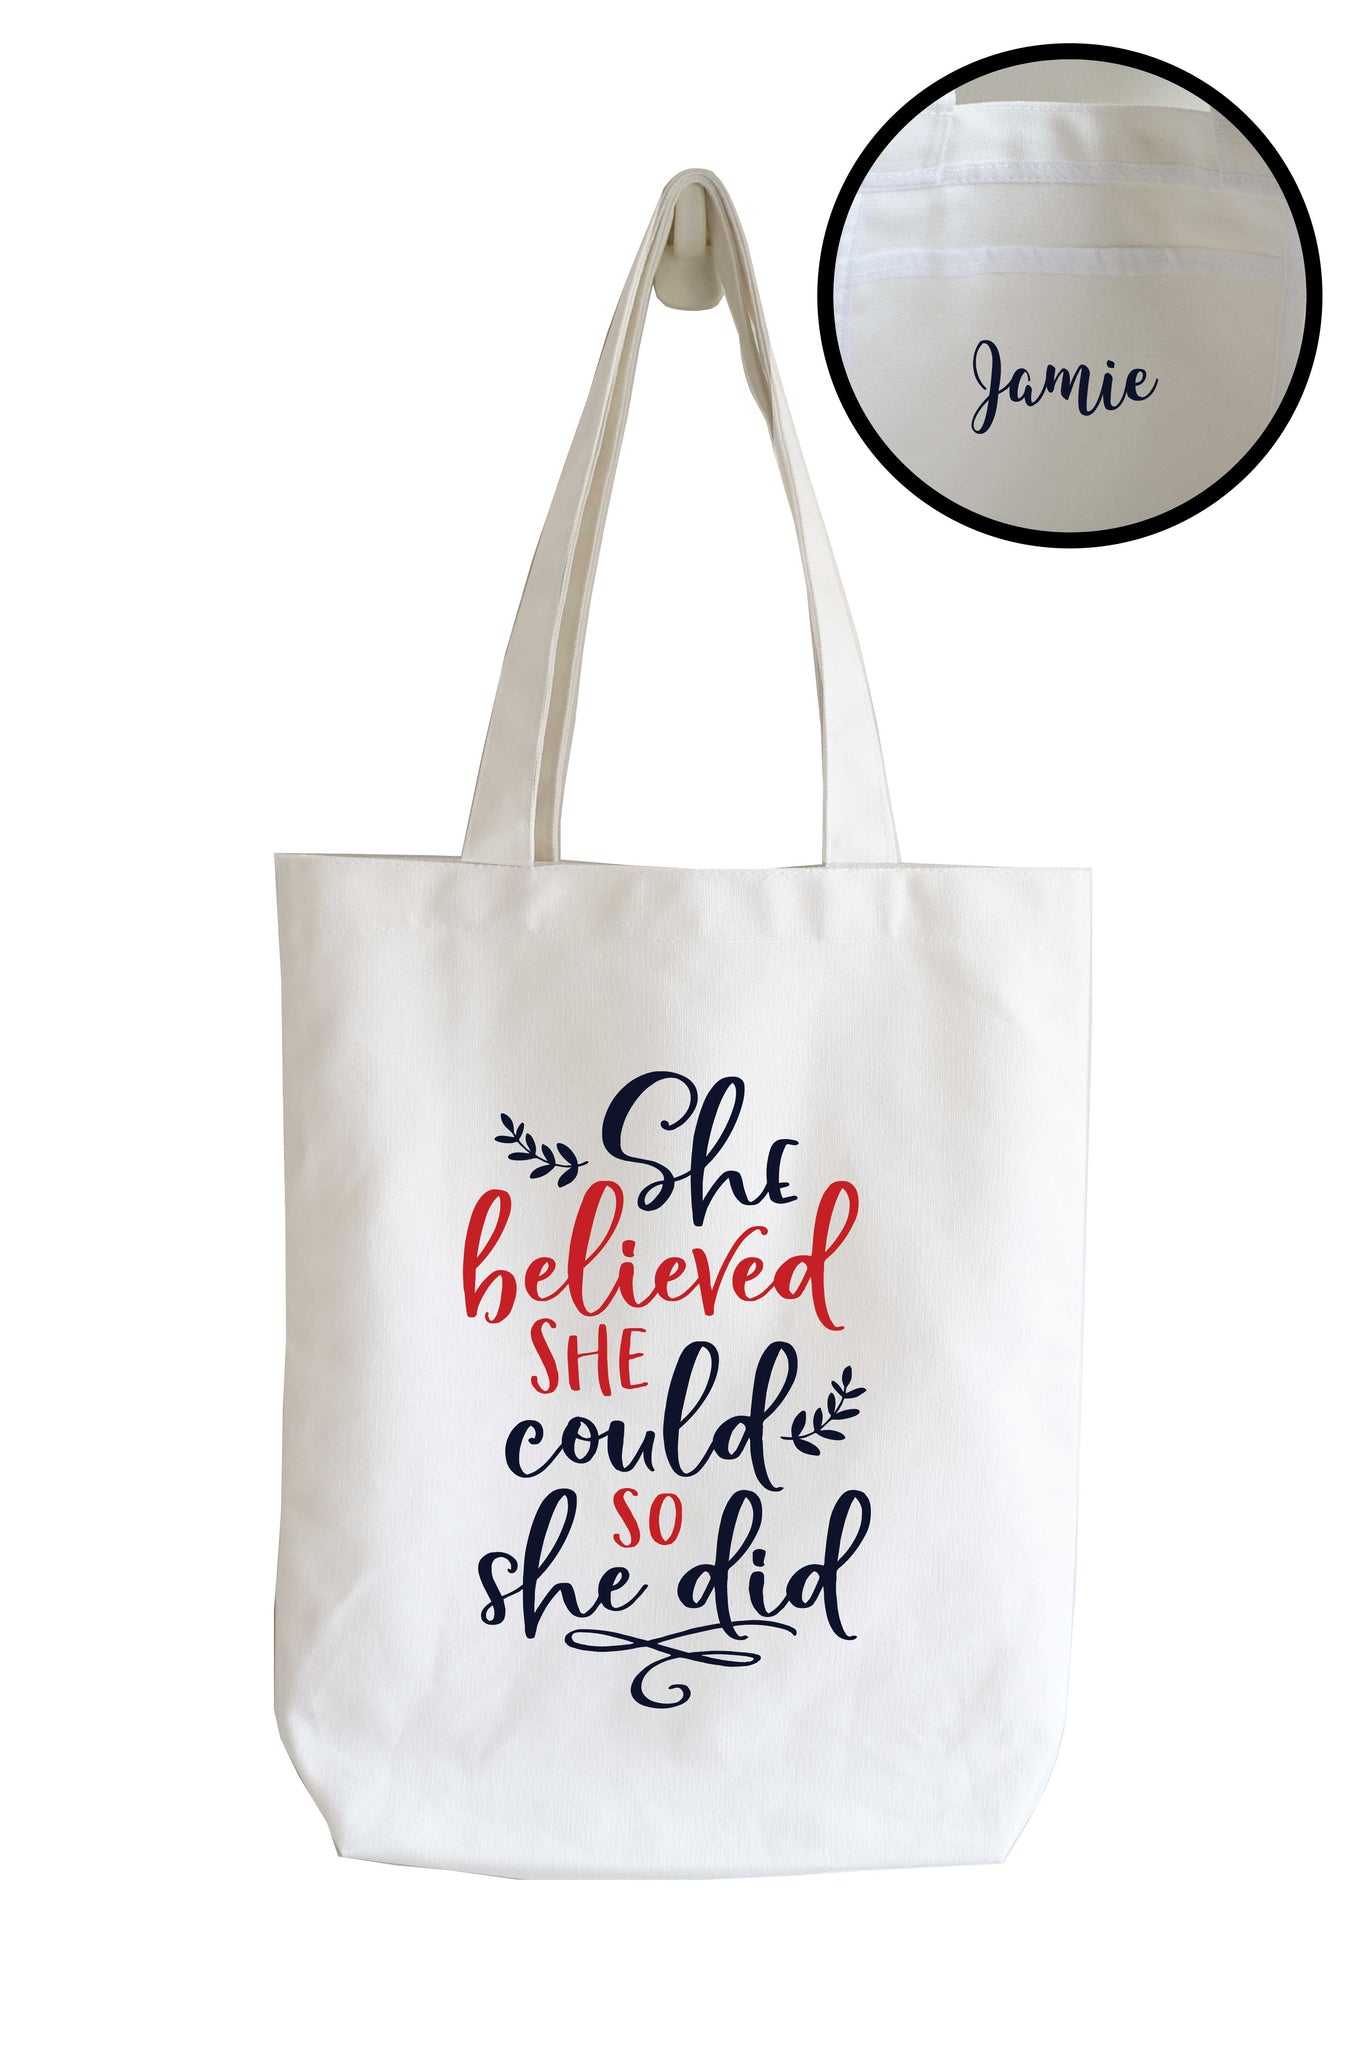 Personalised Tote Bag - She Believed She Could